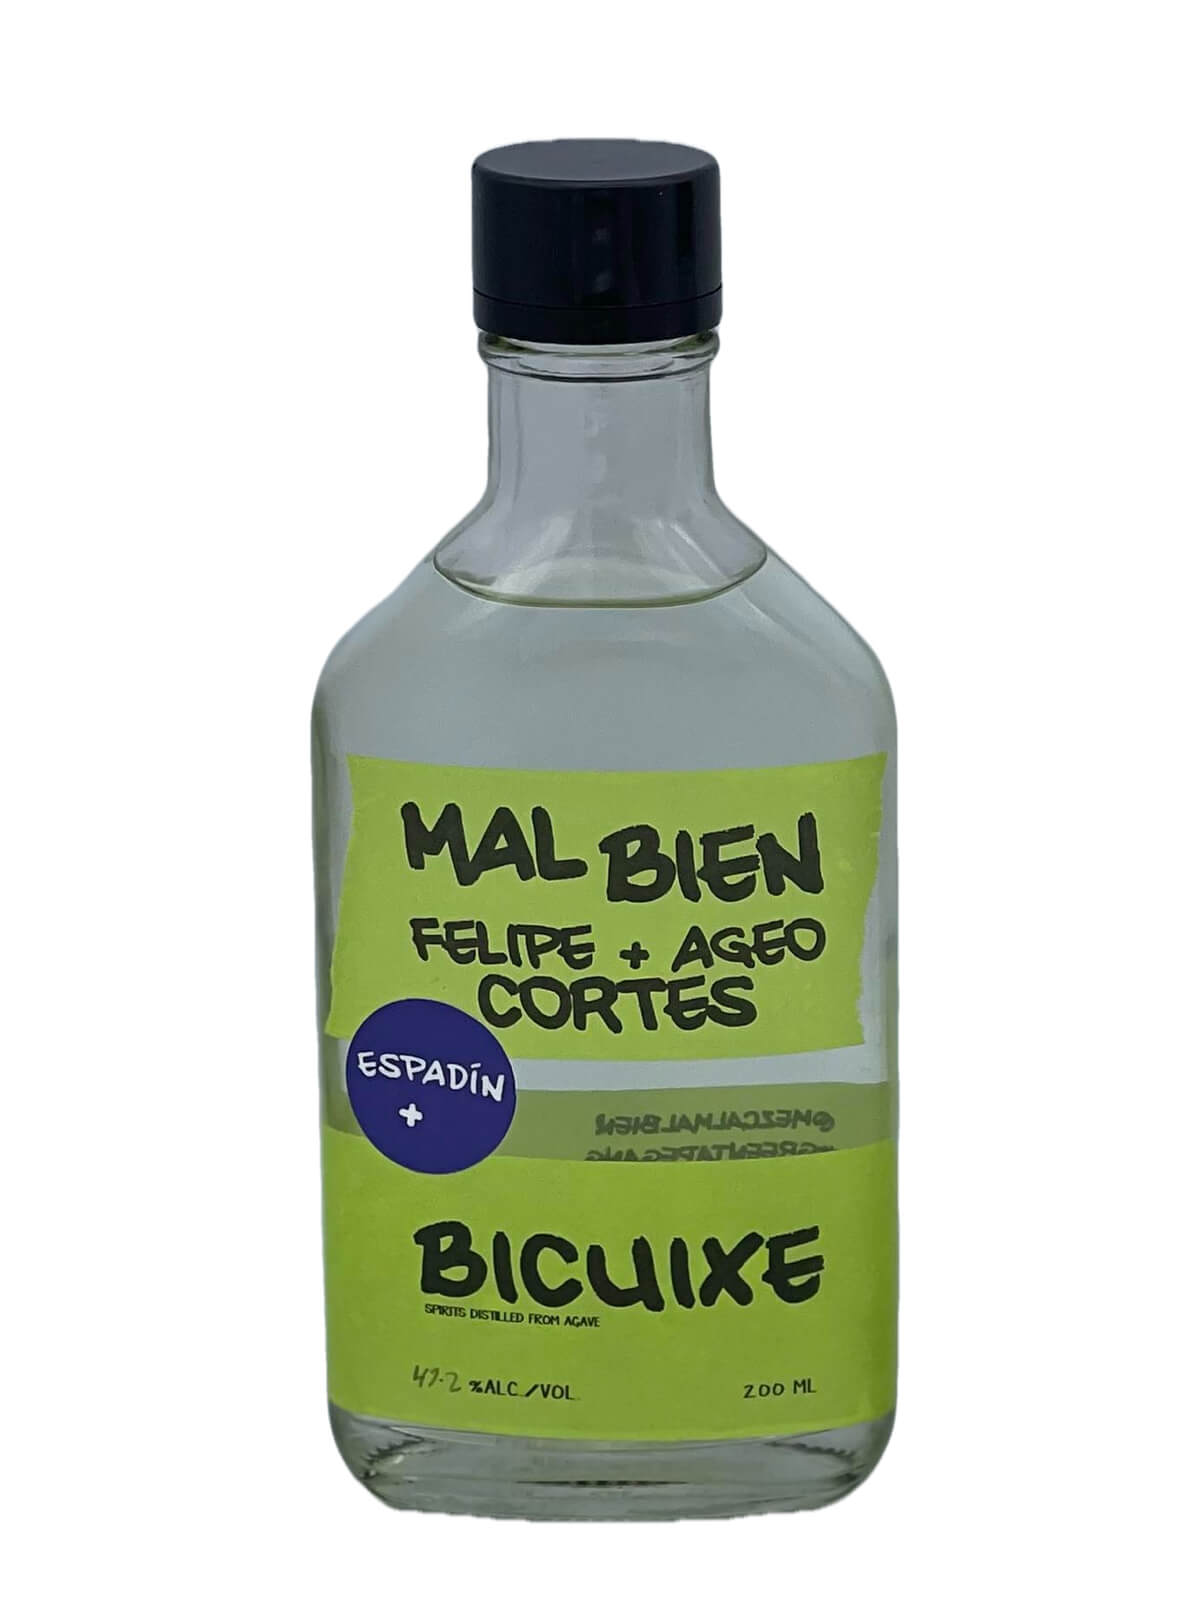 200ml bottle of Mal Bien Espadin and Bicuixe from Felipe and Ageo Cortes